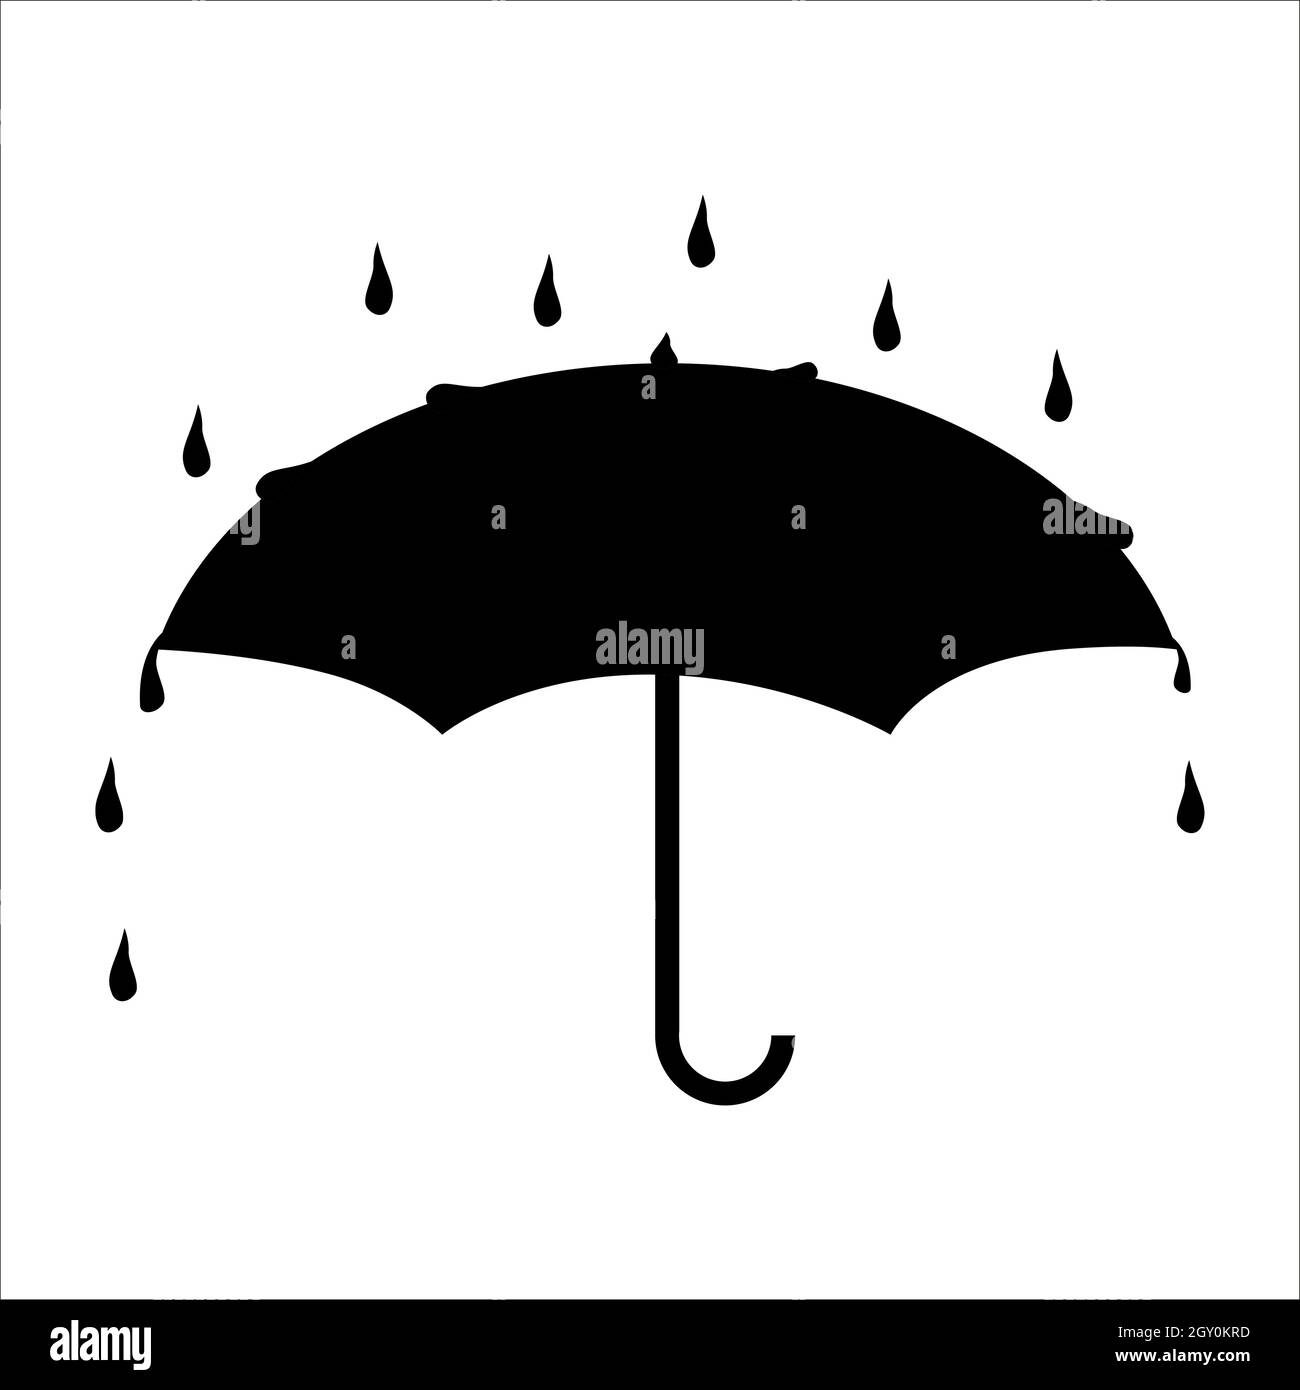 Simple silhouette umbrella icon with dripping drops isolated on white ...